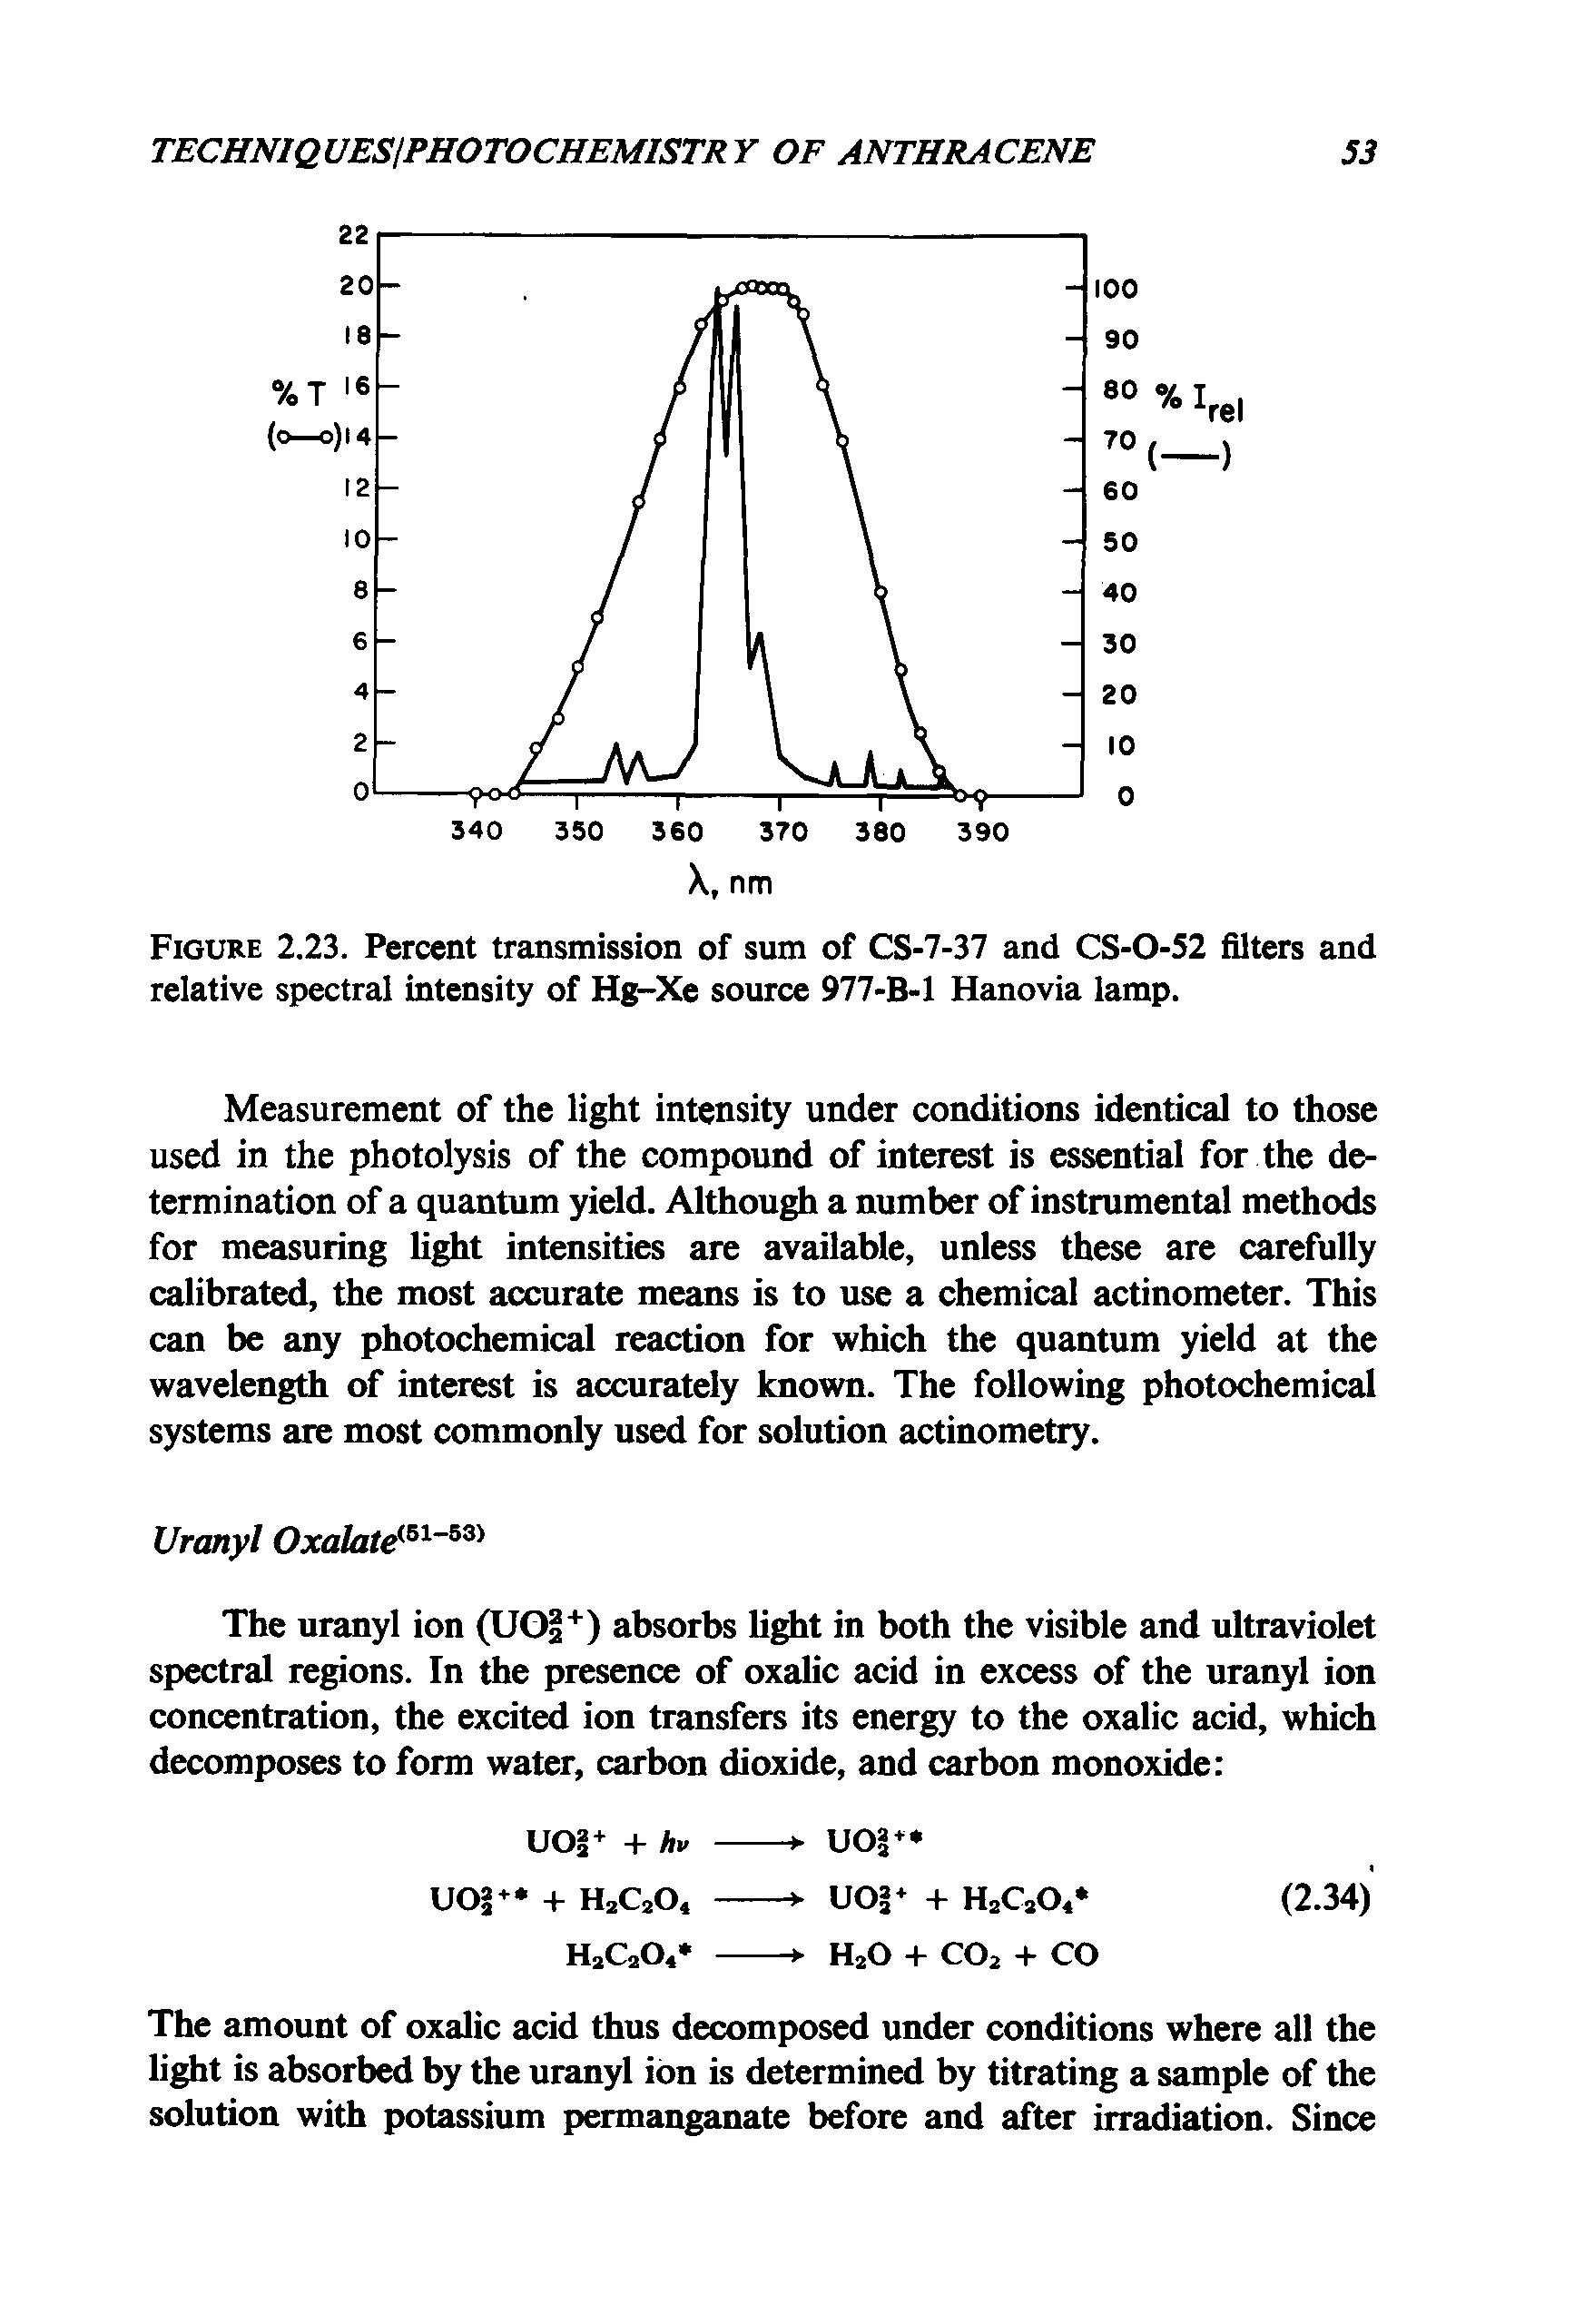 Figure 2.23. Percent transmission of sum of CS-7-37 and CS-O-52 filters and relative spectral intensity of Hg-Xe source 977-B-l Hanovia lamp.